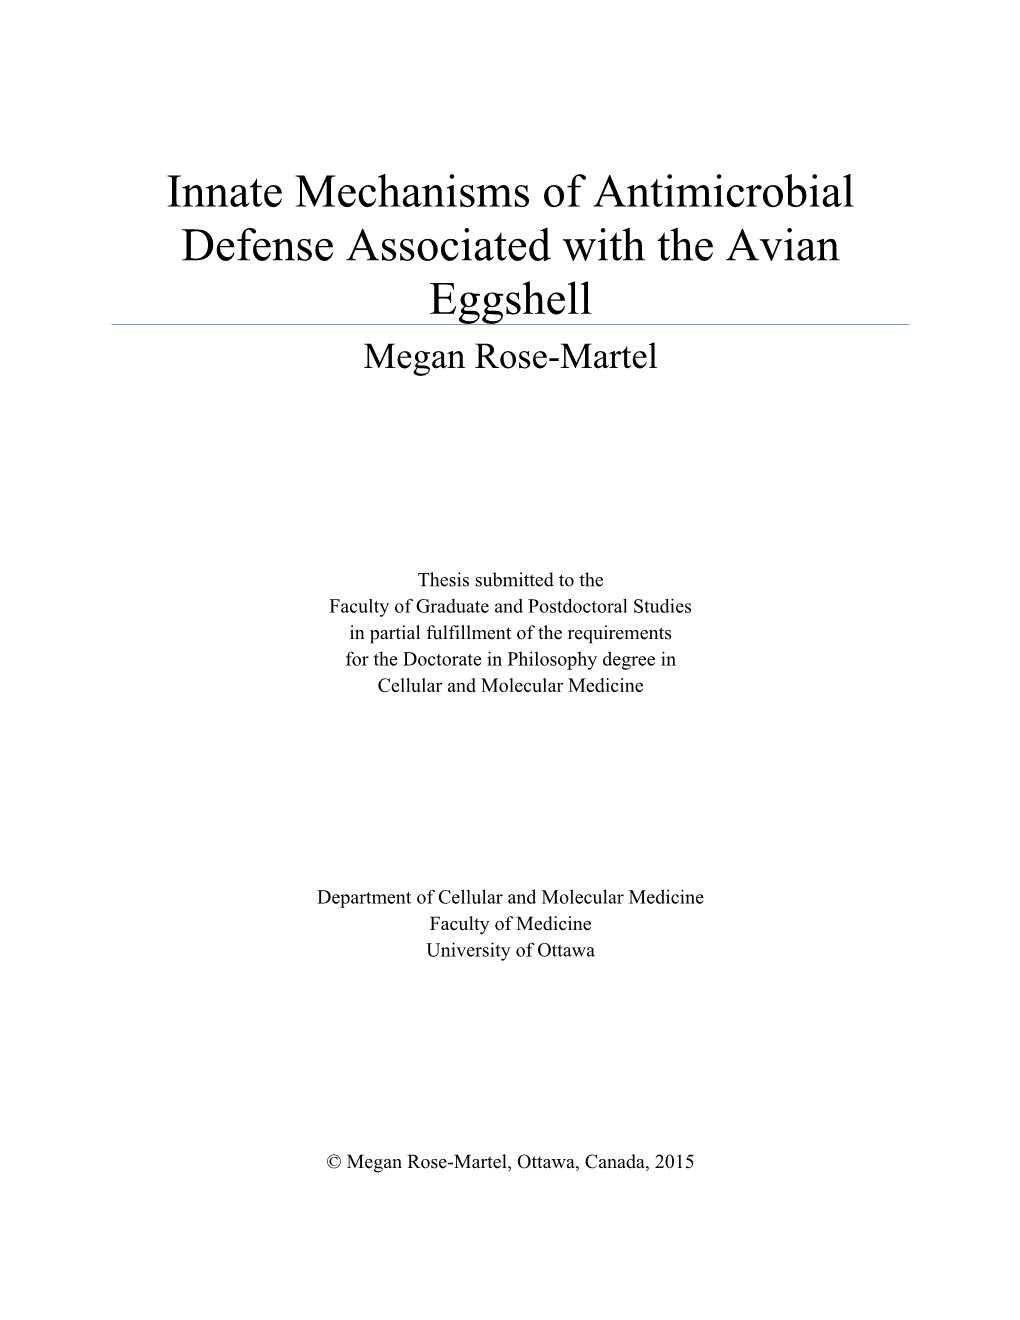 Innate Mechanisms of Antimicrobial Defense Associated with the Avian Eggshell Megan Rose-Martel